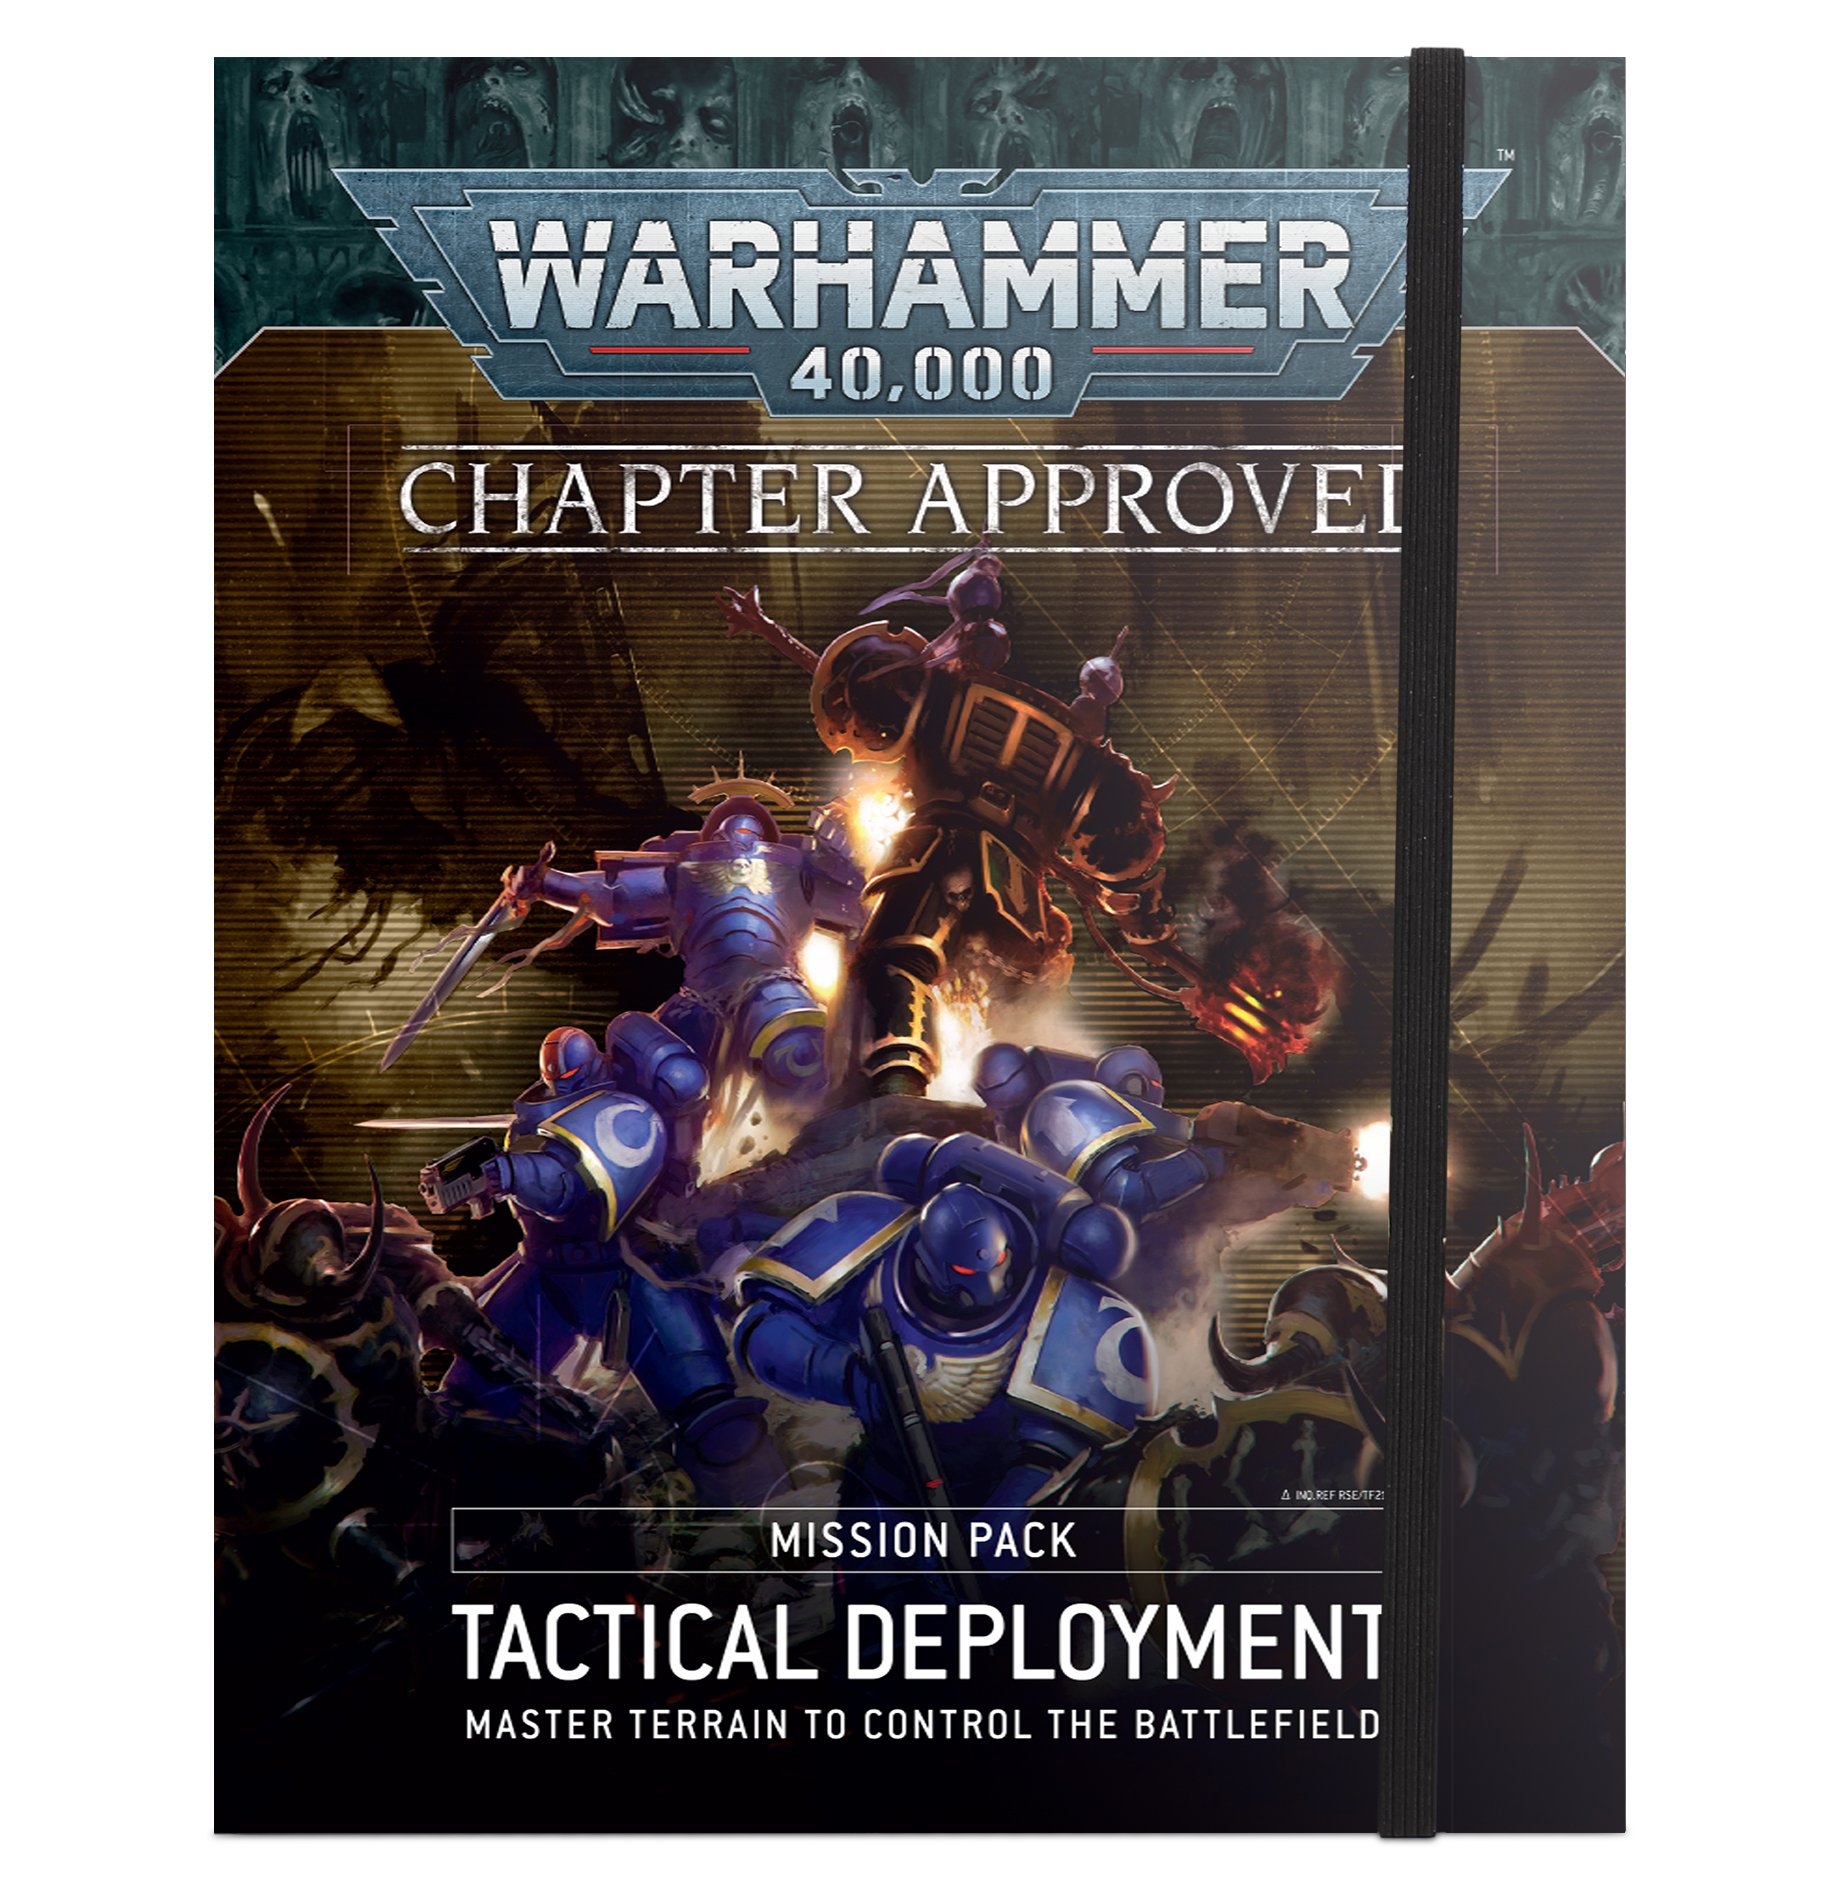 Warhammer 40,000: Chapter Approved Mission Pack: Tactical Deployment 